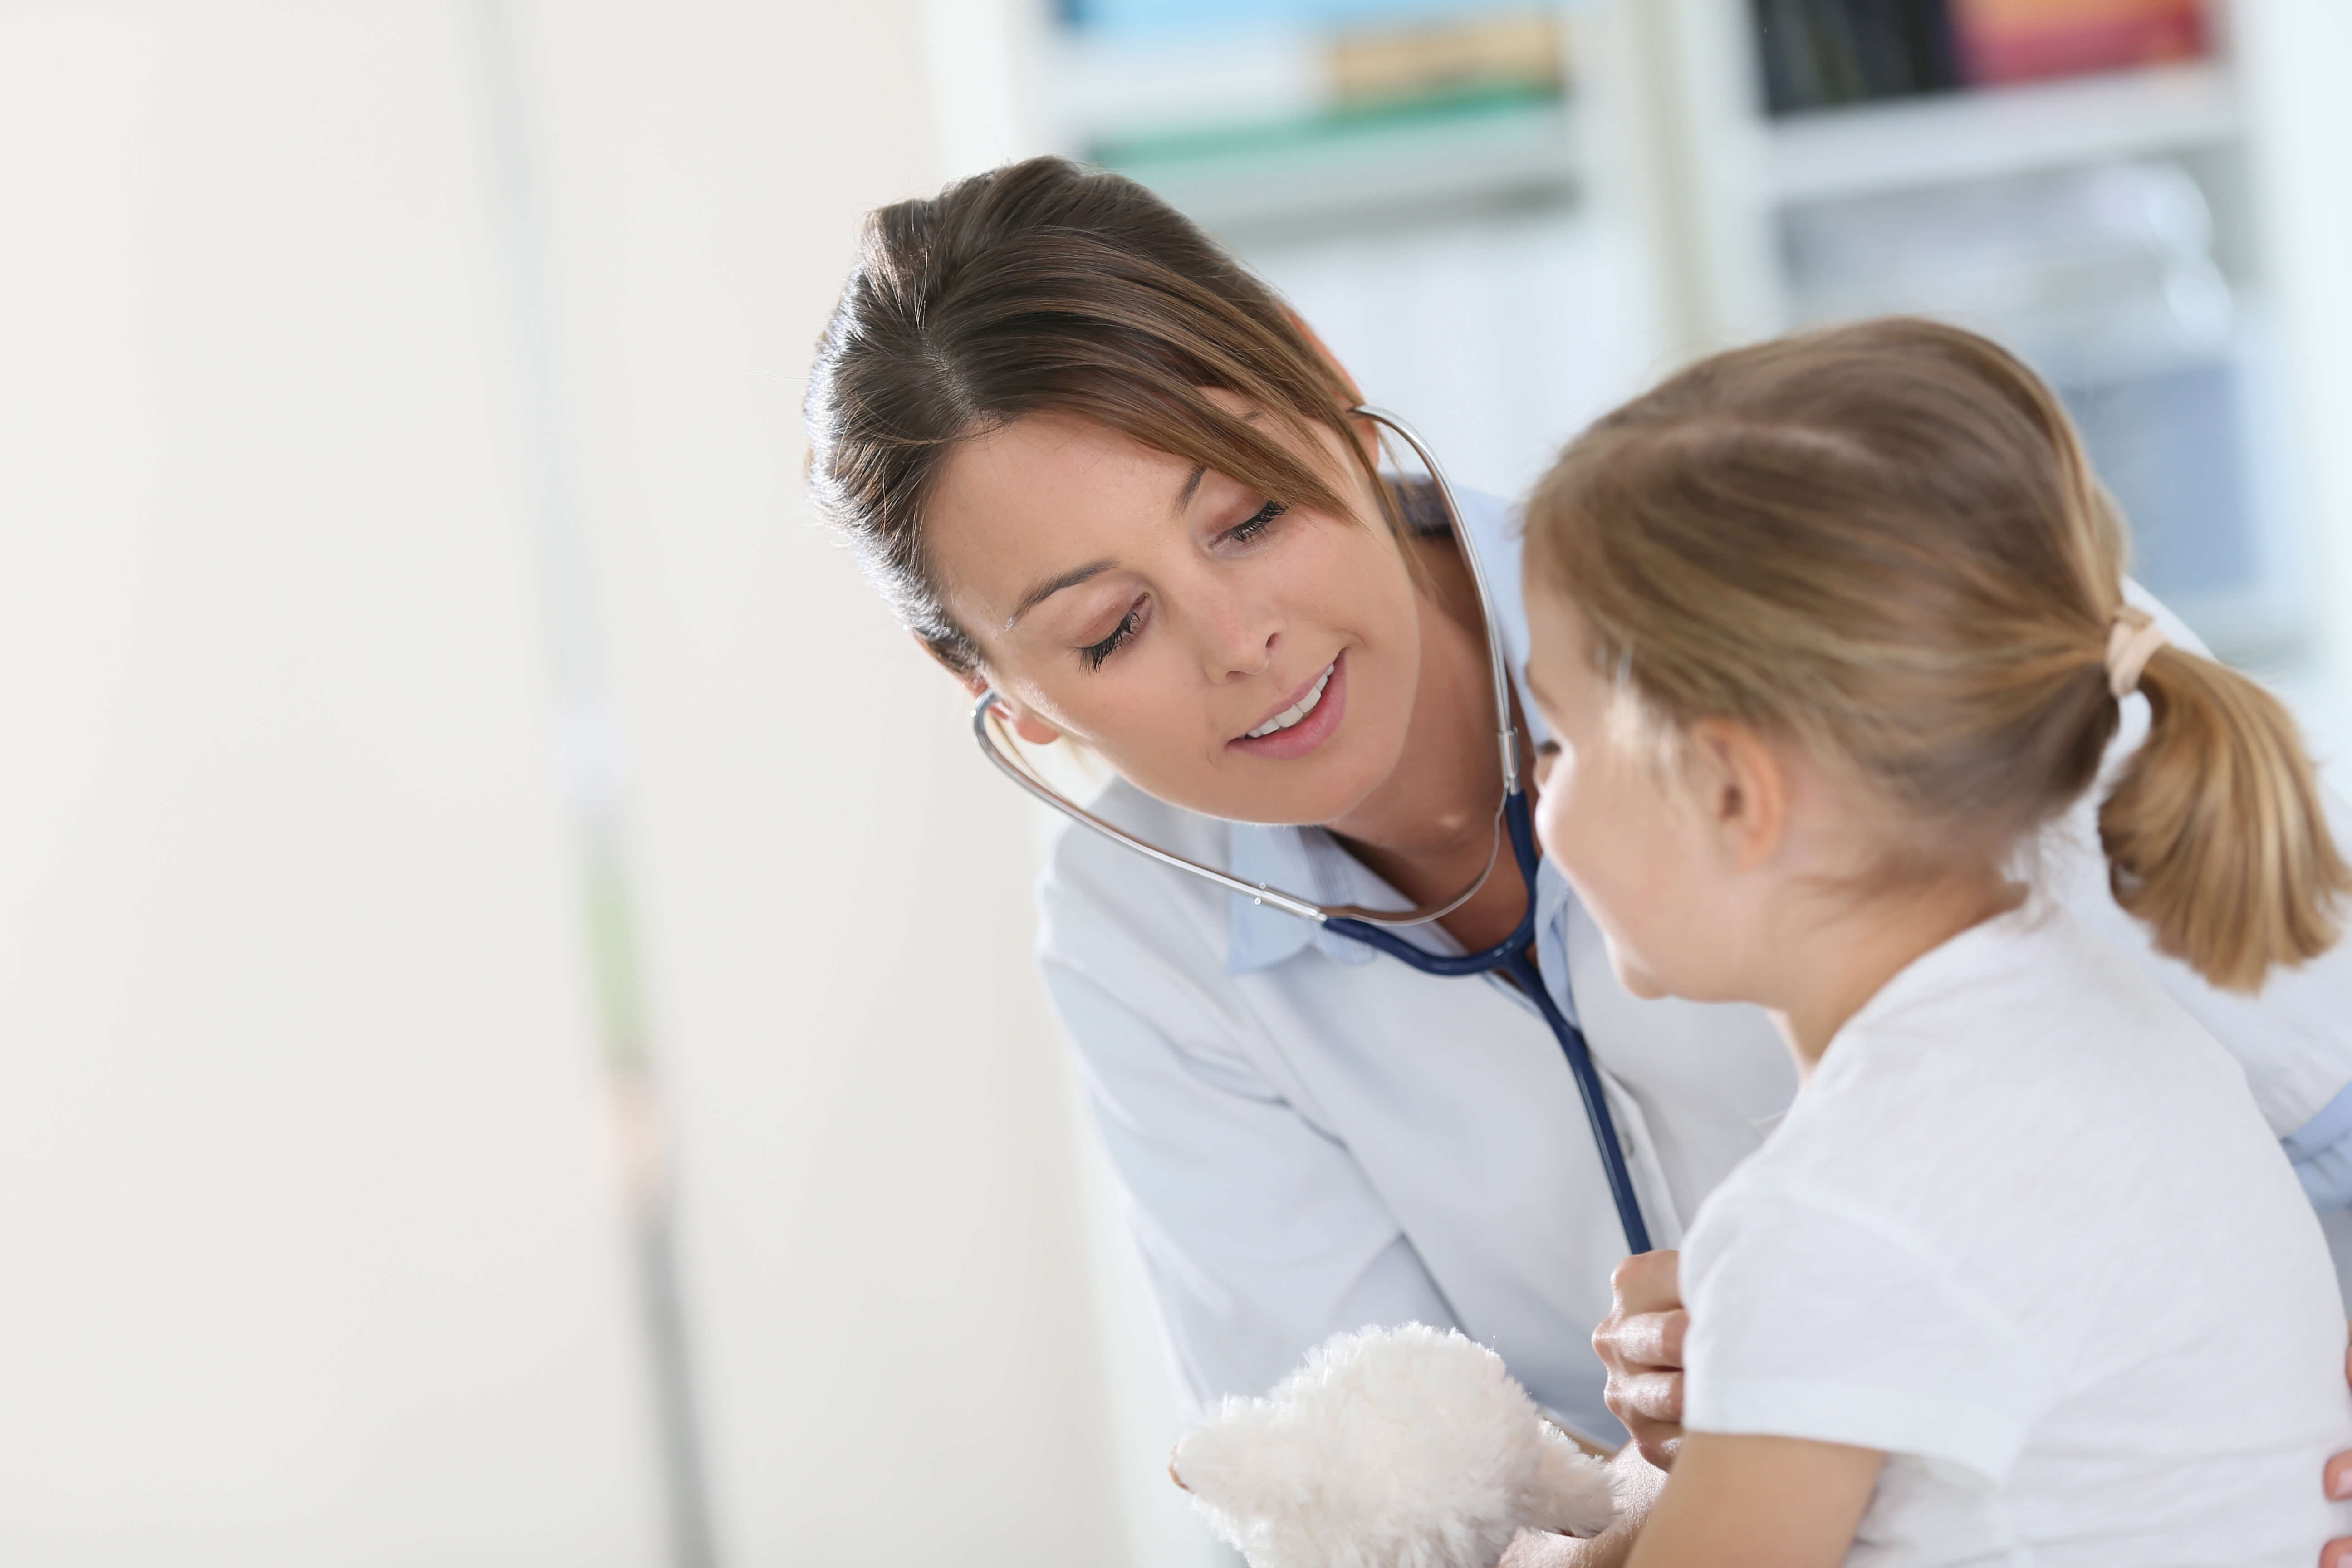 a woman with a stethoscope listening to a child's heart